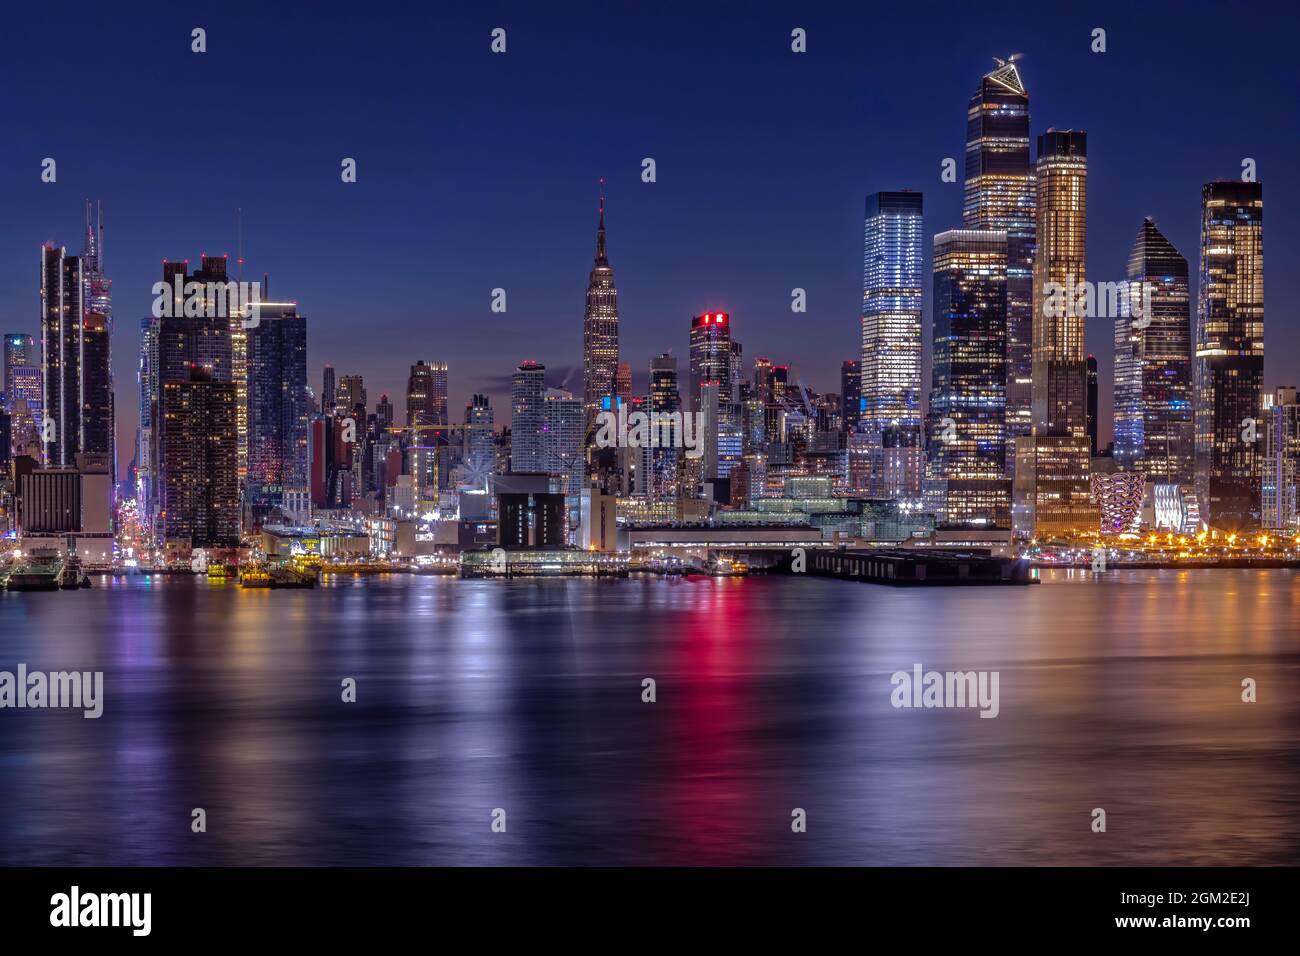 Empire State Hudson Yards - Pre dawn at the NYC skyline, as well as the Chelsea and Hudson Yards neighborhoods of Manhattan in, New York City.    Huds Stock Photo